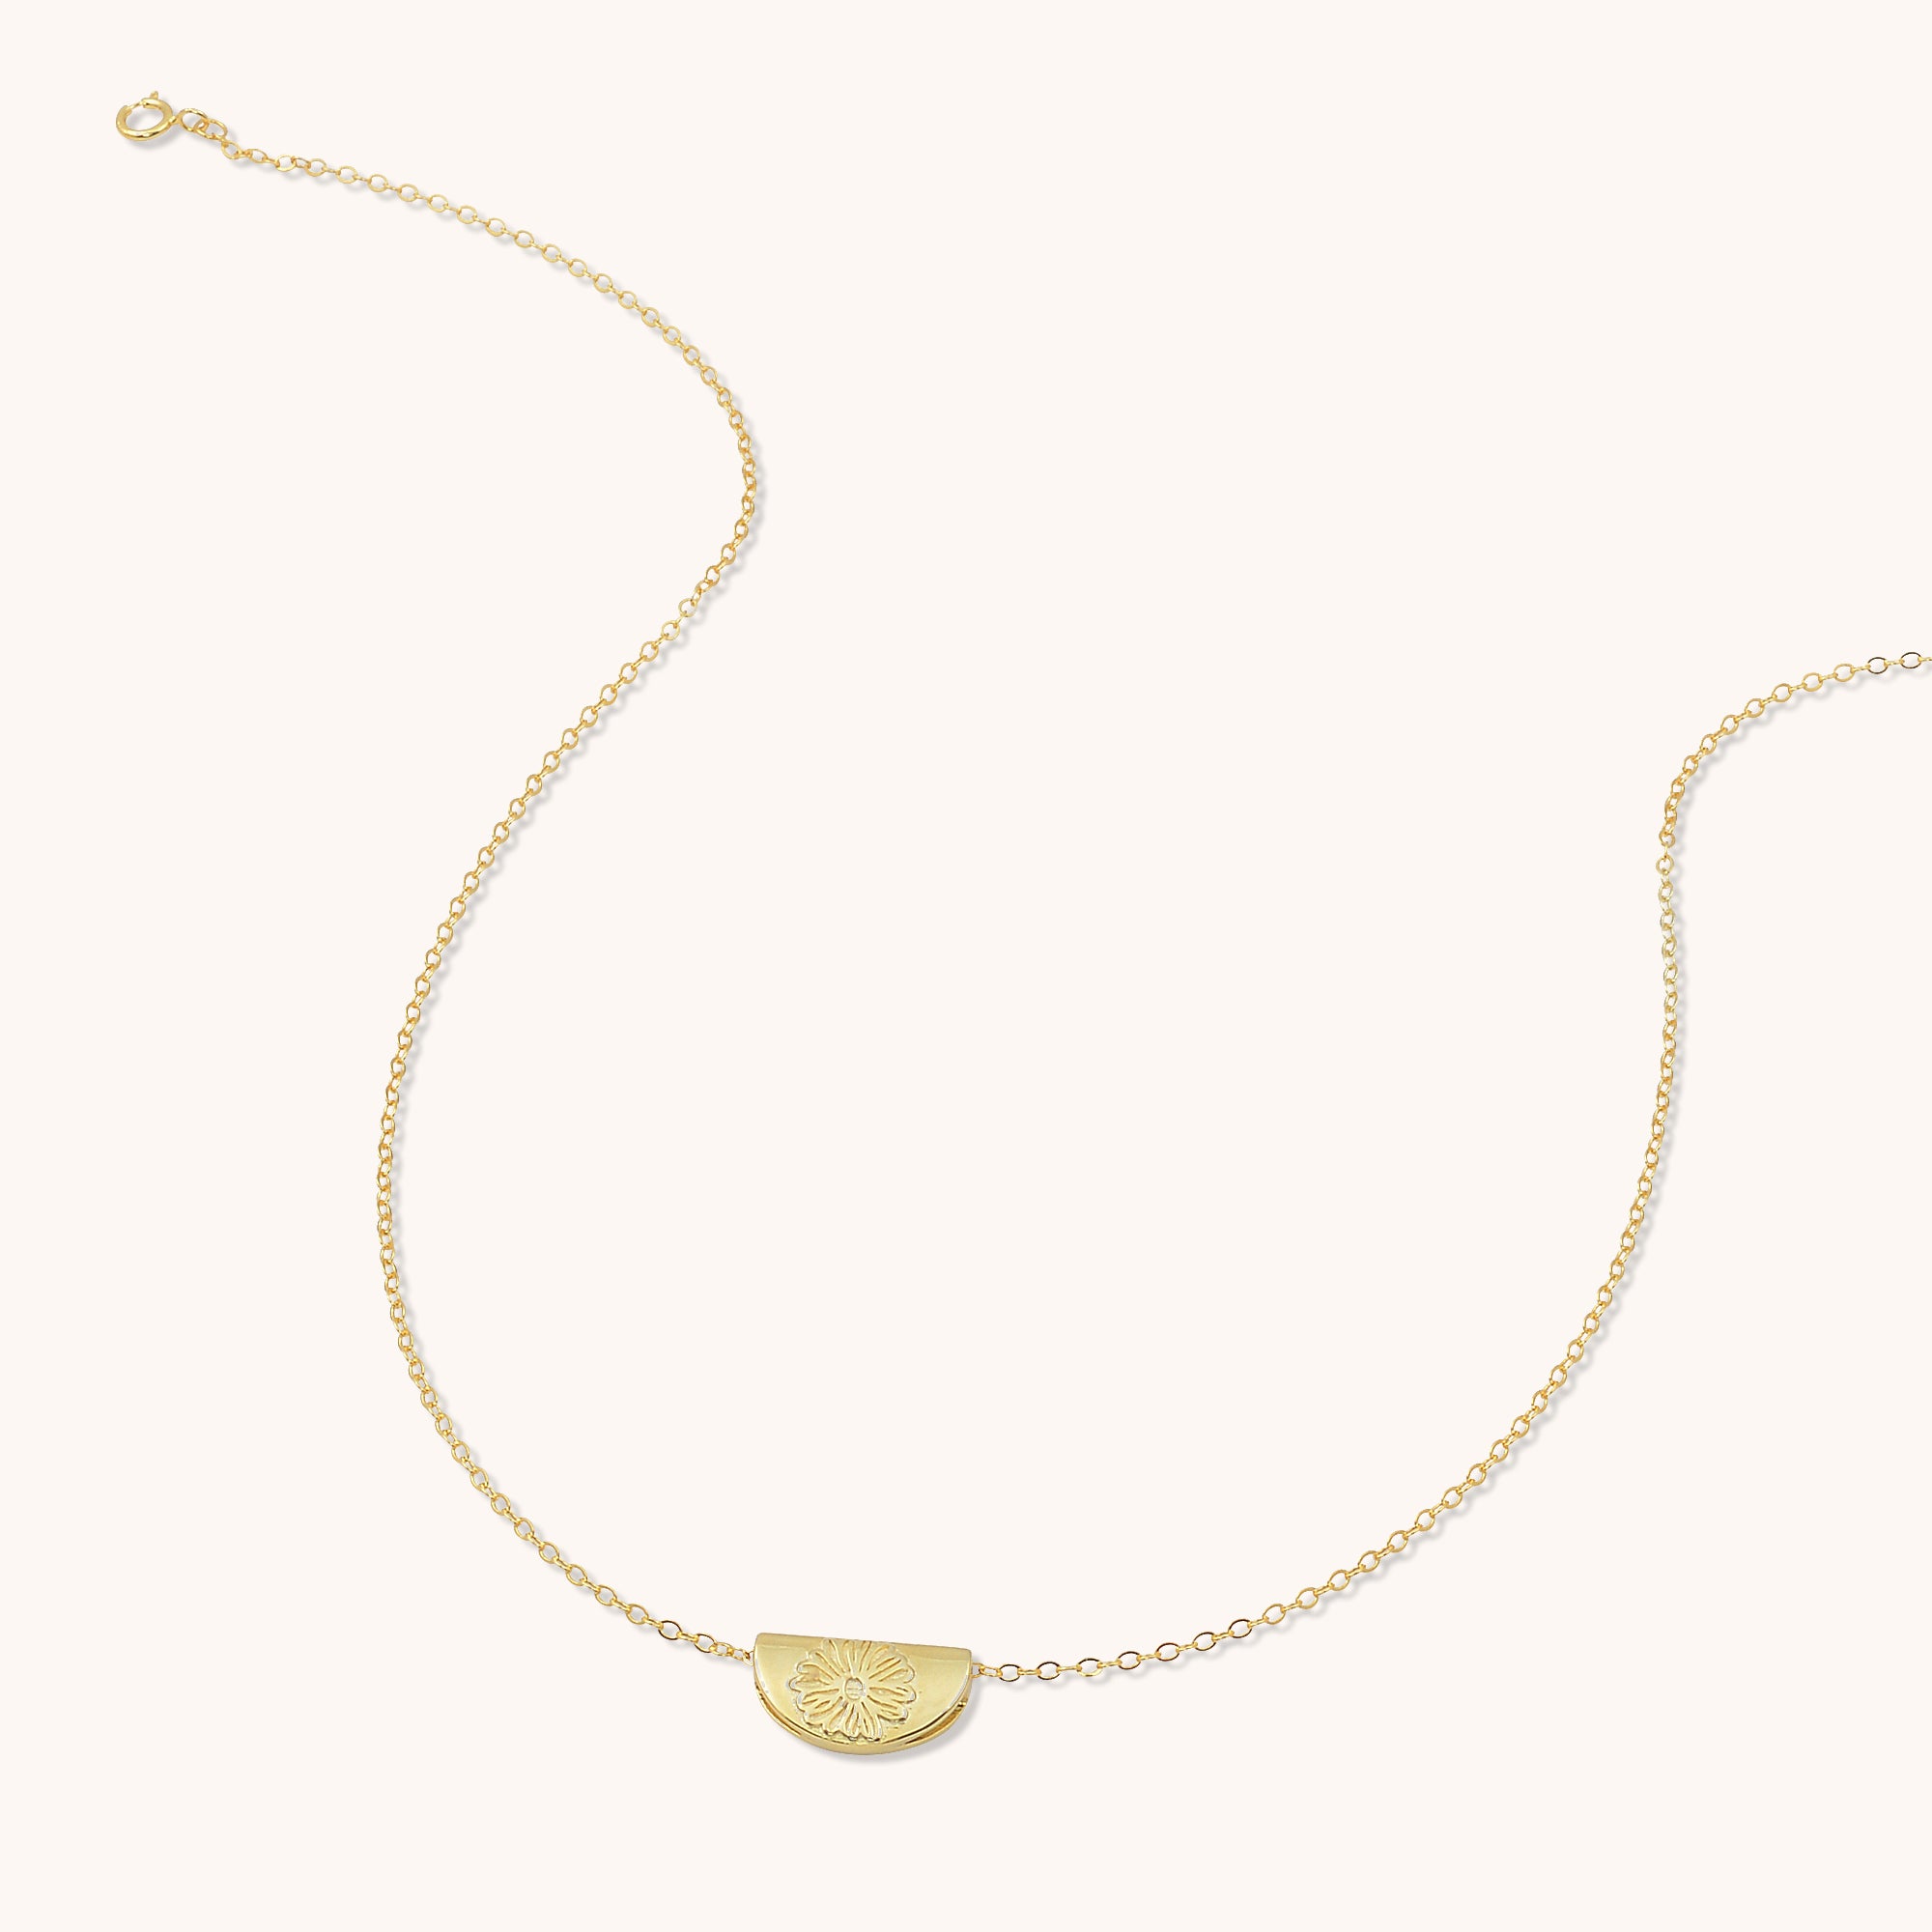 Birth Flower Necklace April (Daisy) Gold